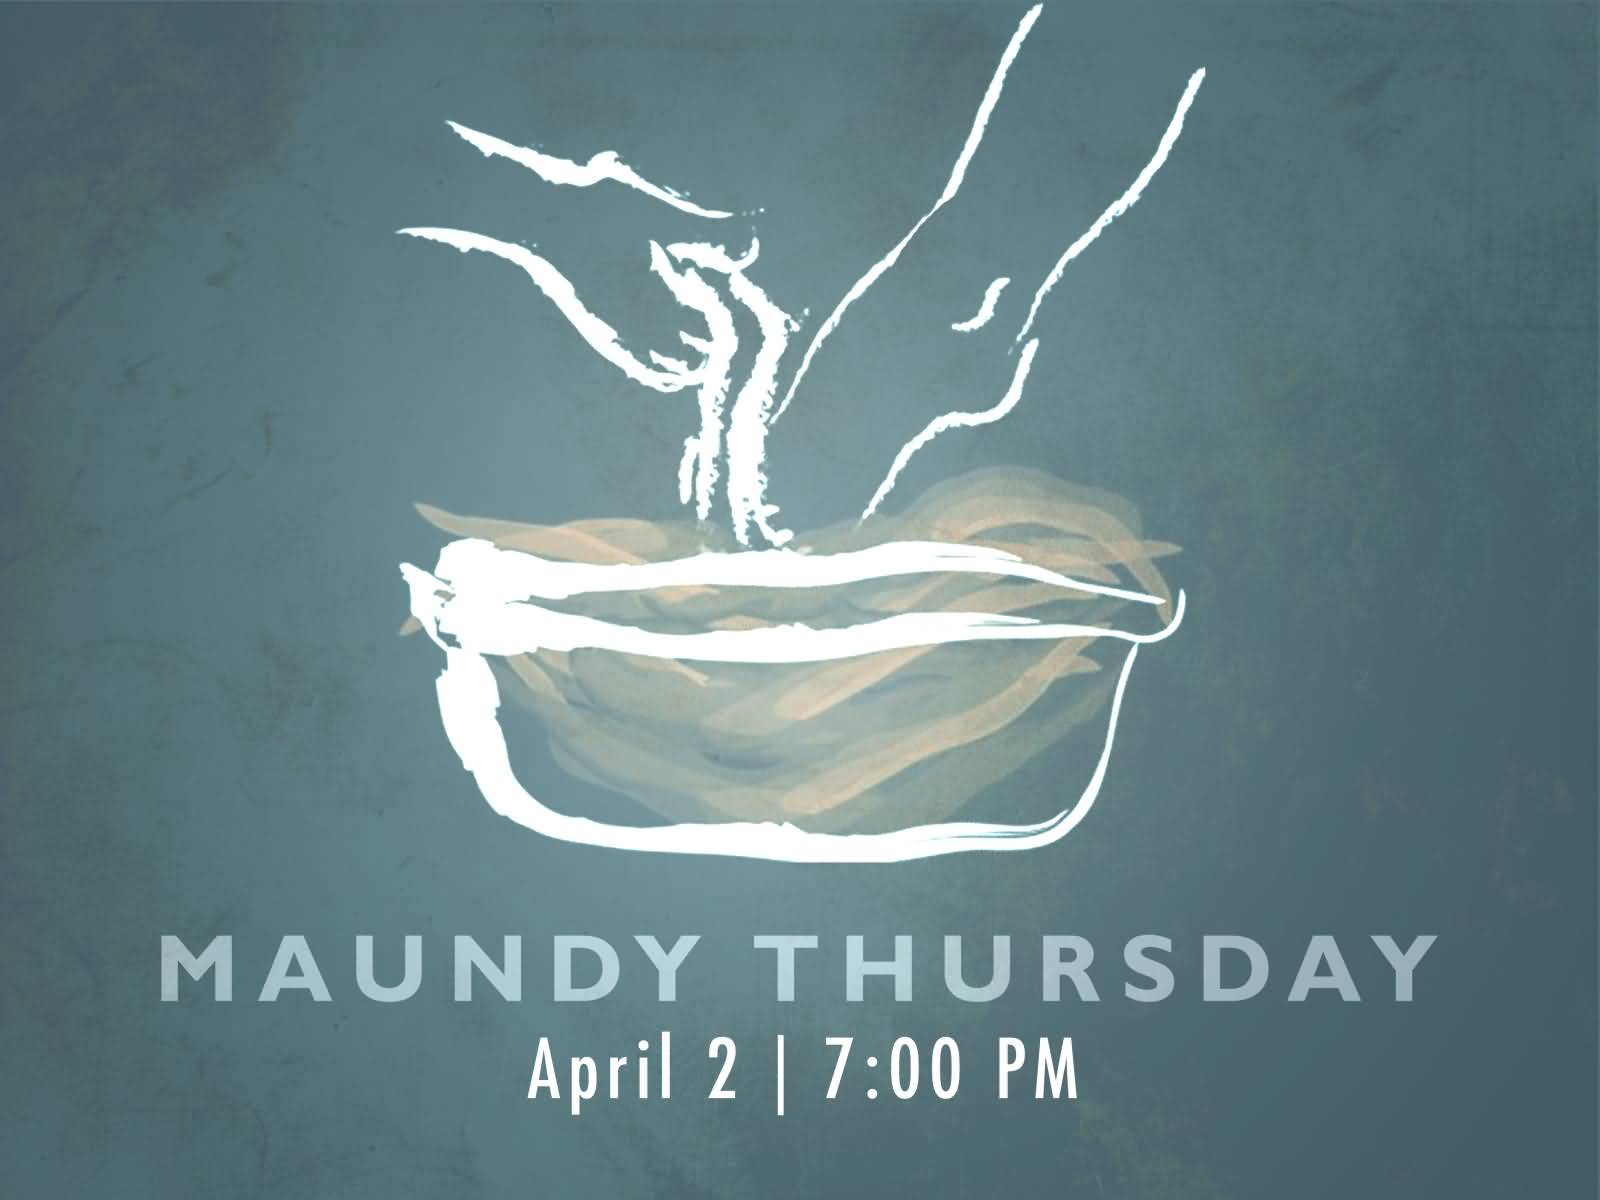 52 Holy Maundy Thursday Wish Pictures